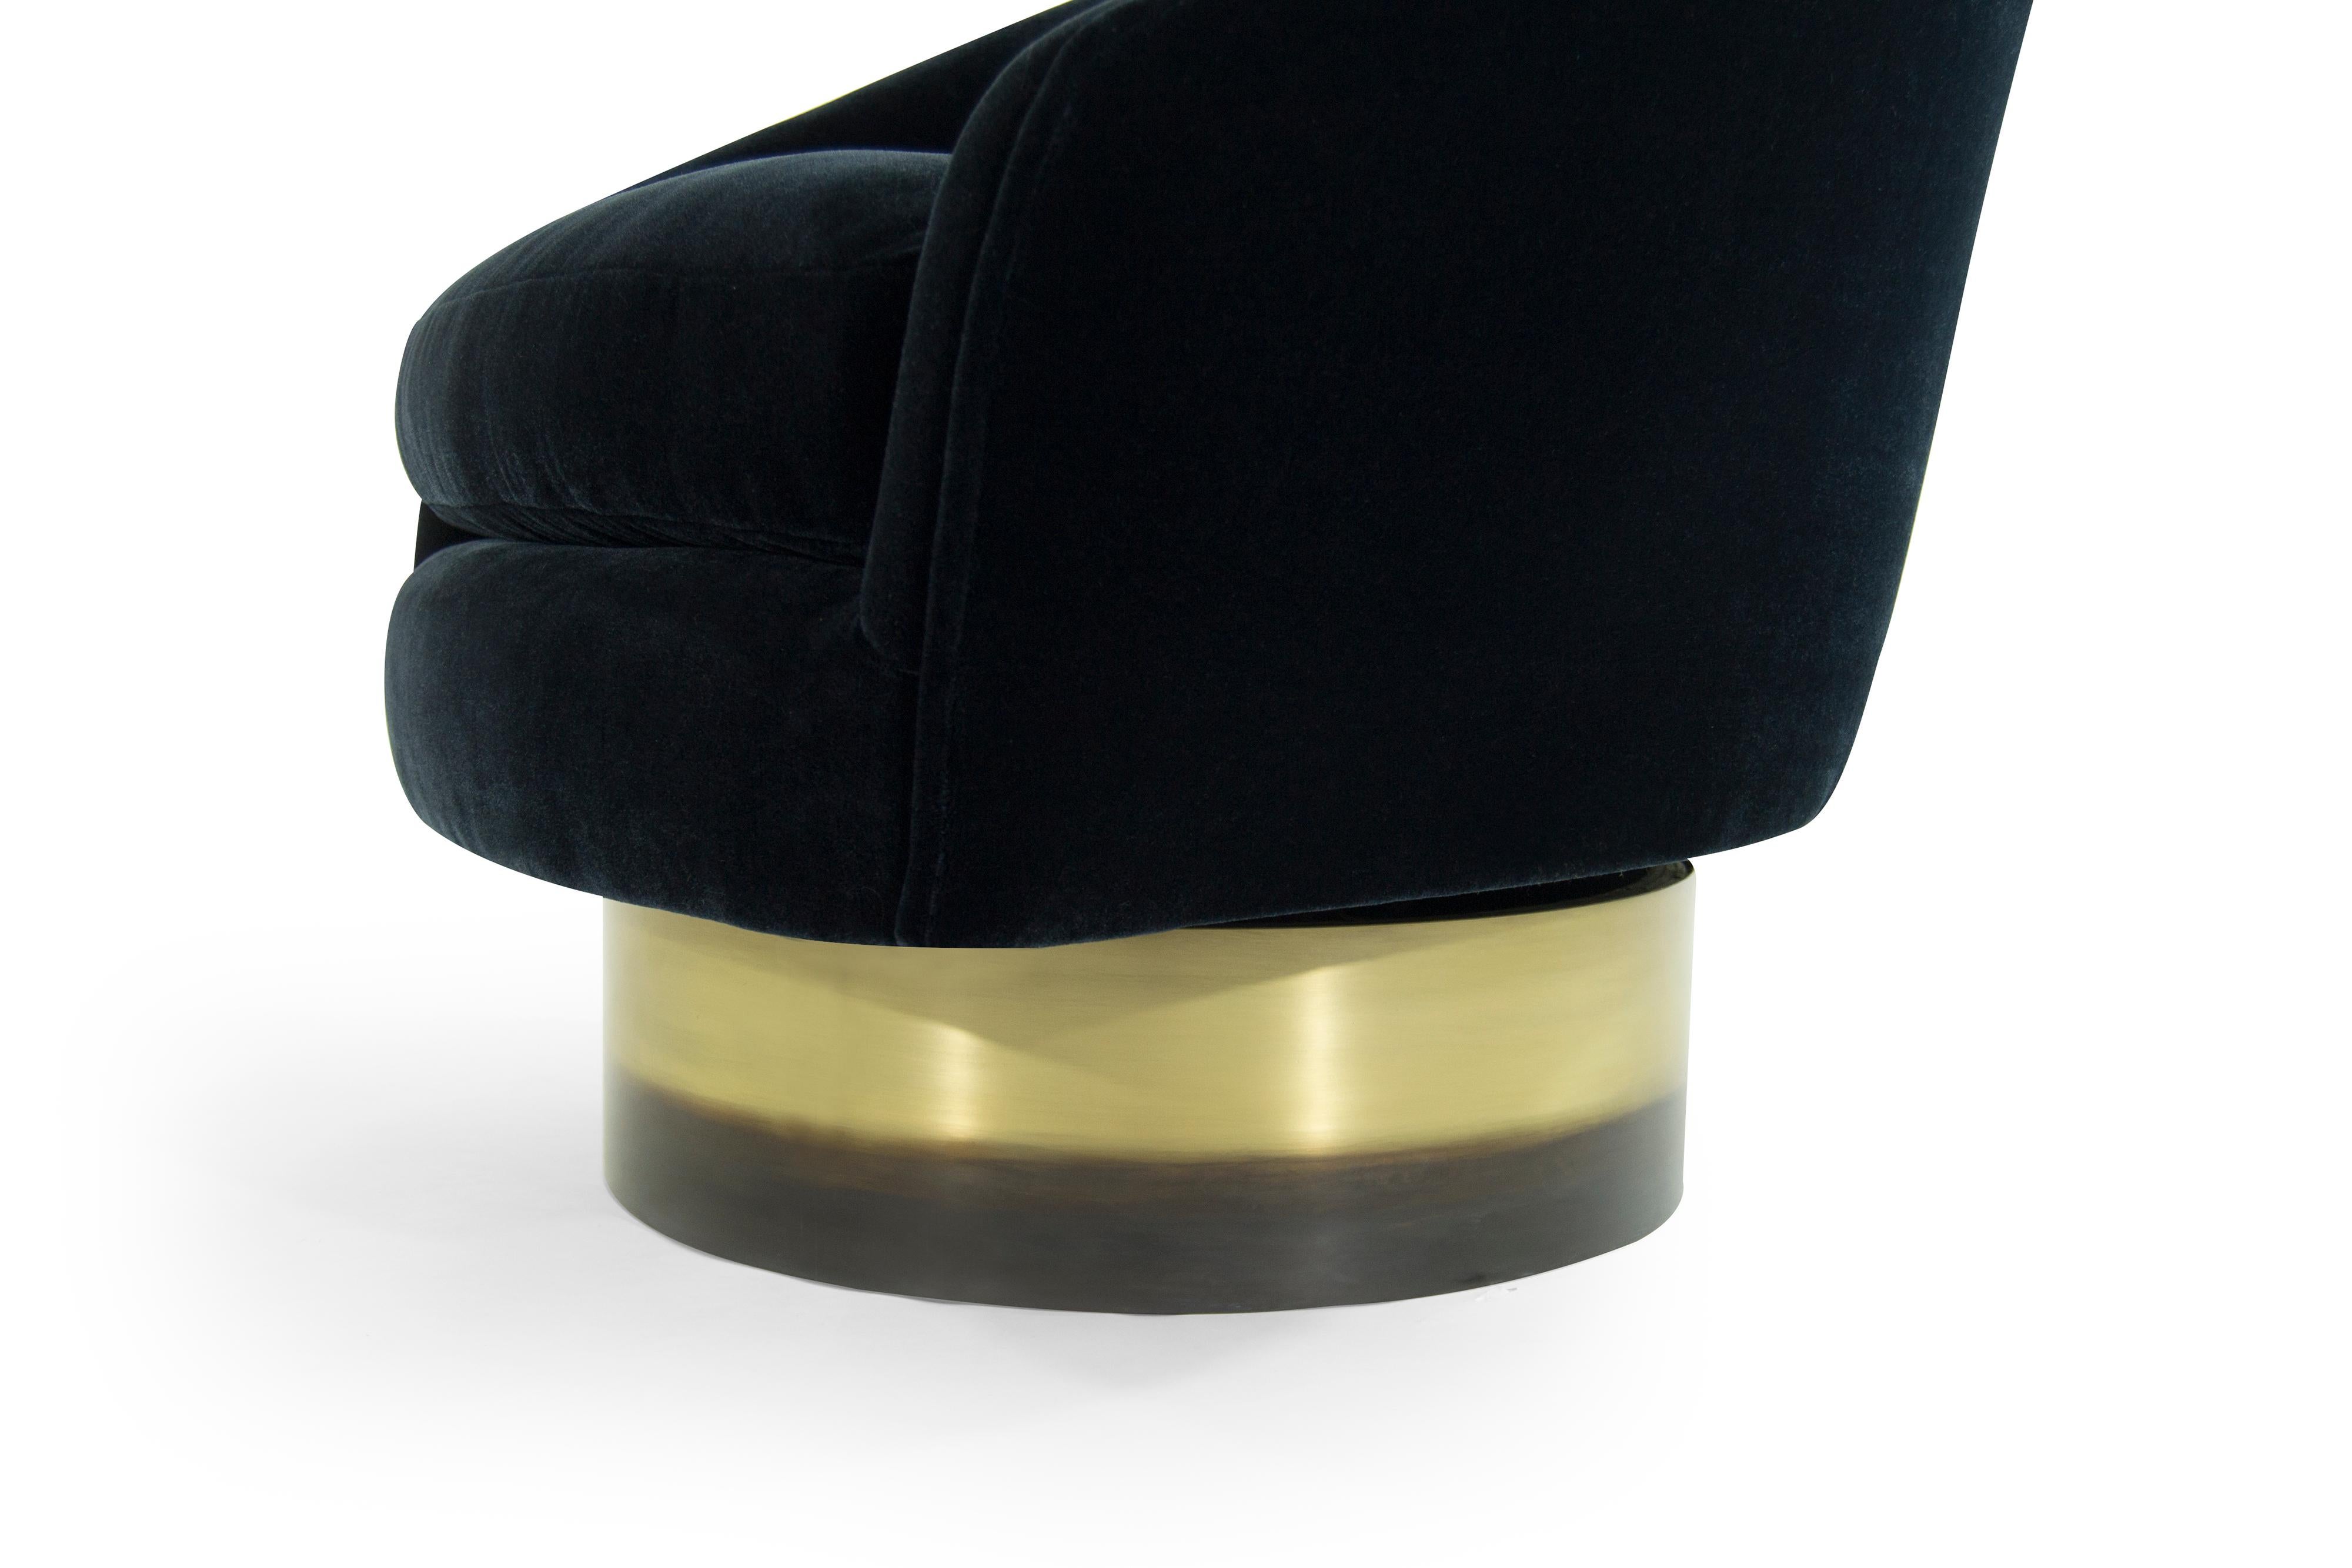 Mohair Adrian Pearsall for Craft Associates Swivel Chairs on Brass Bases